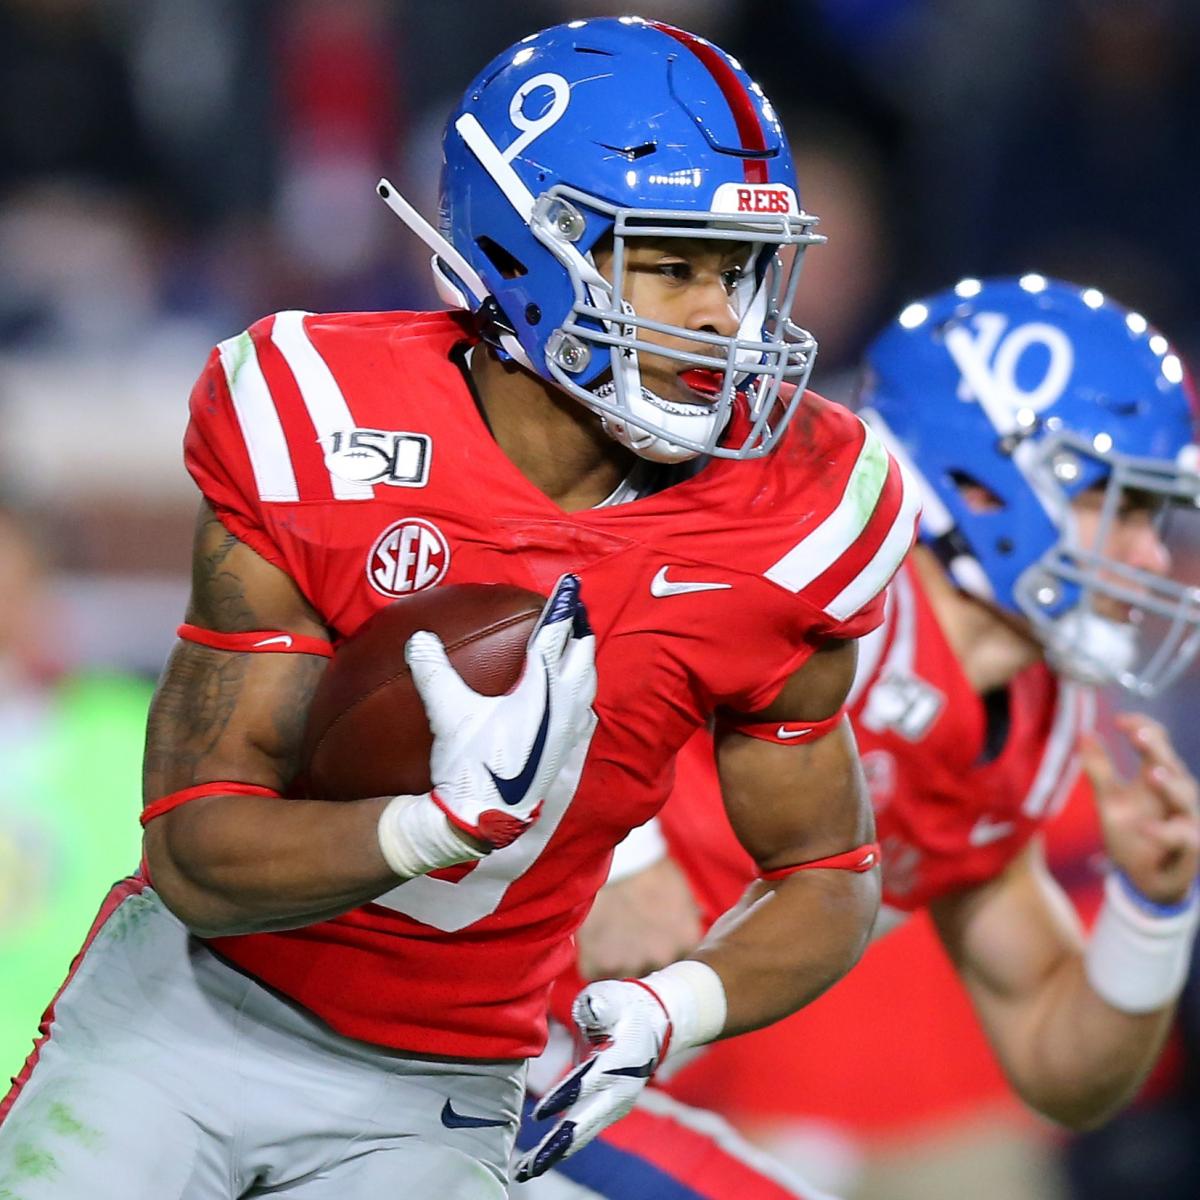 Top 15 CFB Players You'll Fall in Love with in 2020 News, Scores